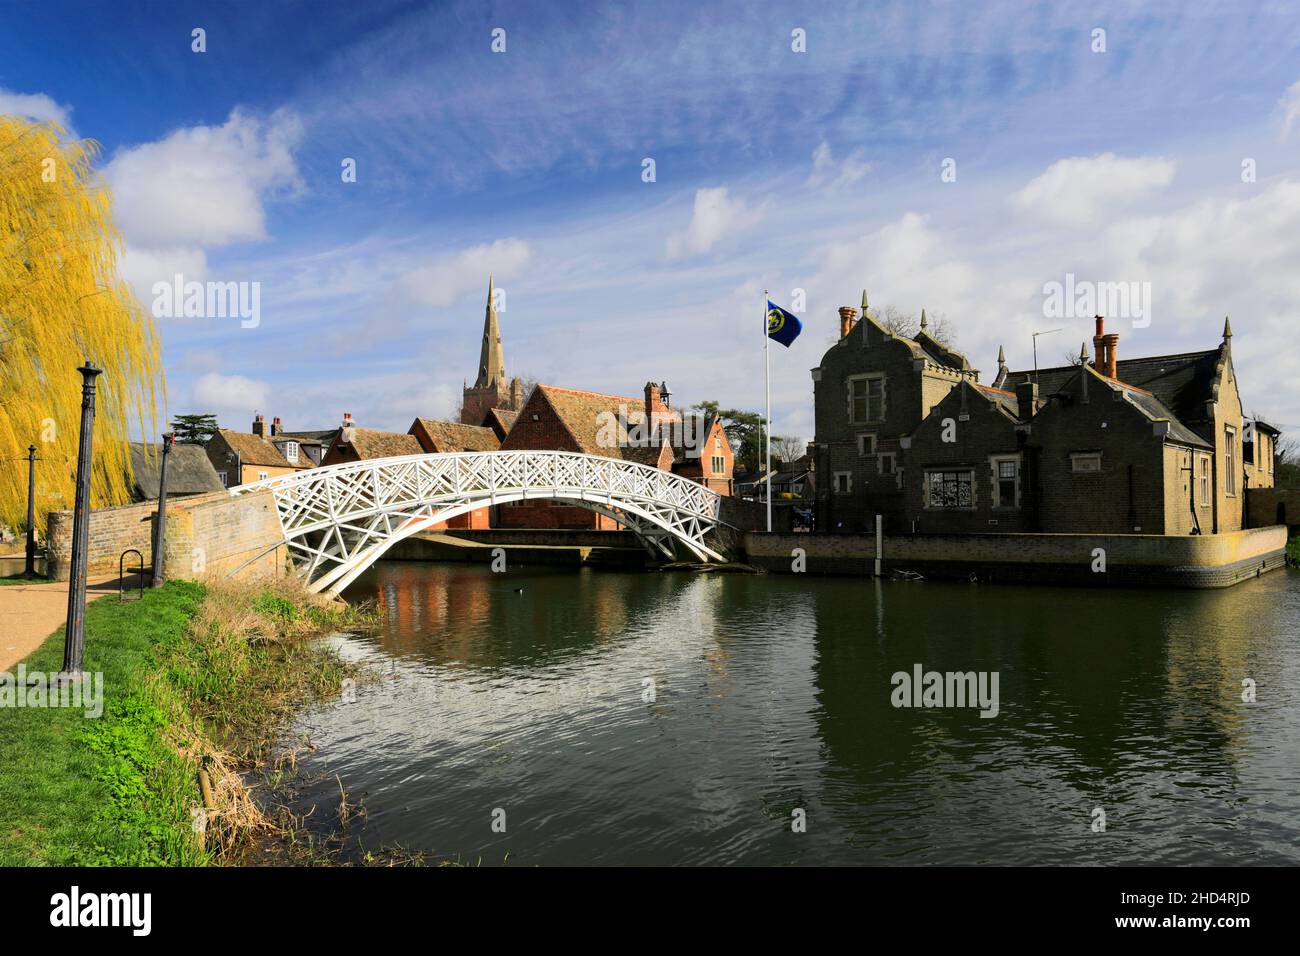 The Chinese footbridge over the river Great Ouse, Godmanchester town, Cambridgeshire, England, UK Stock Photo